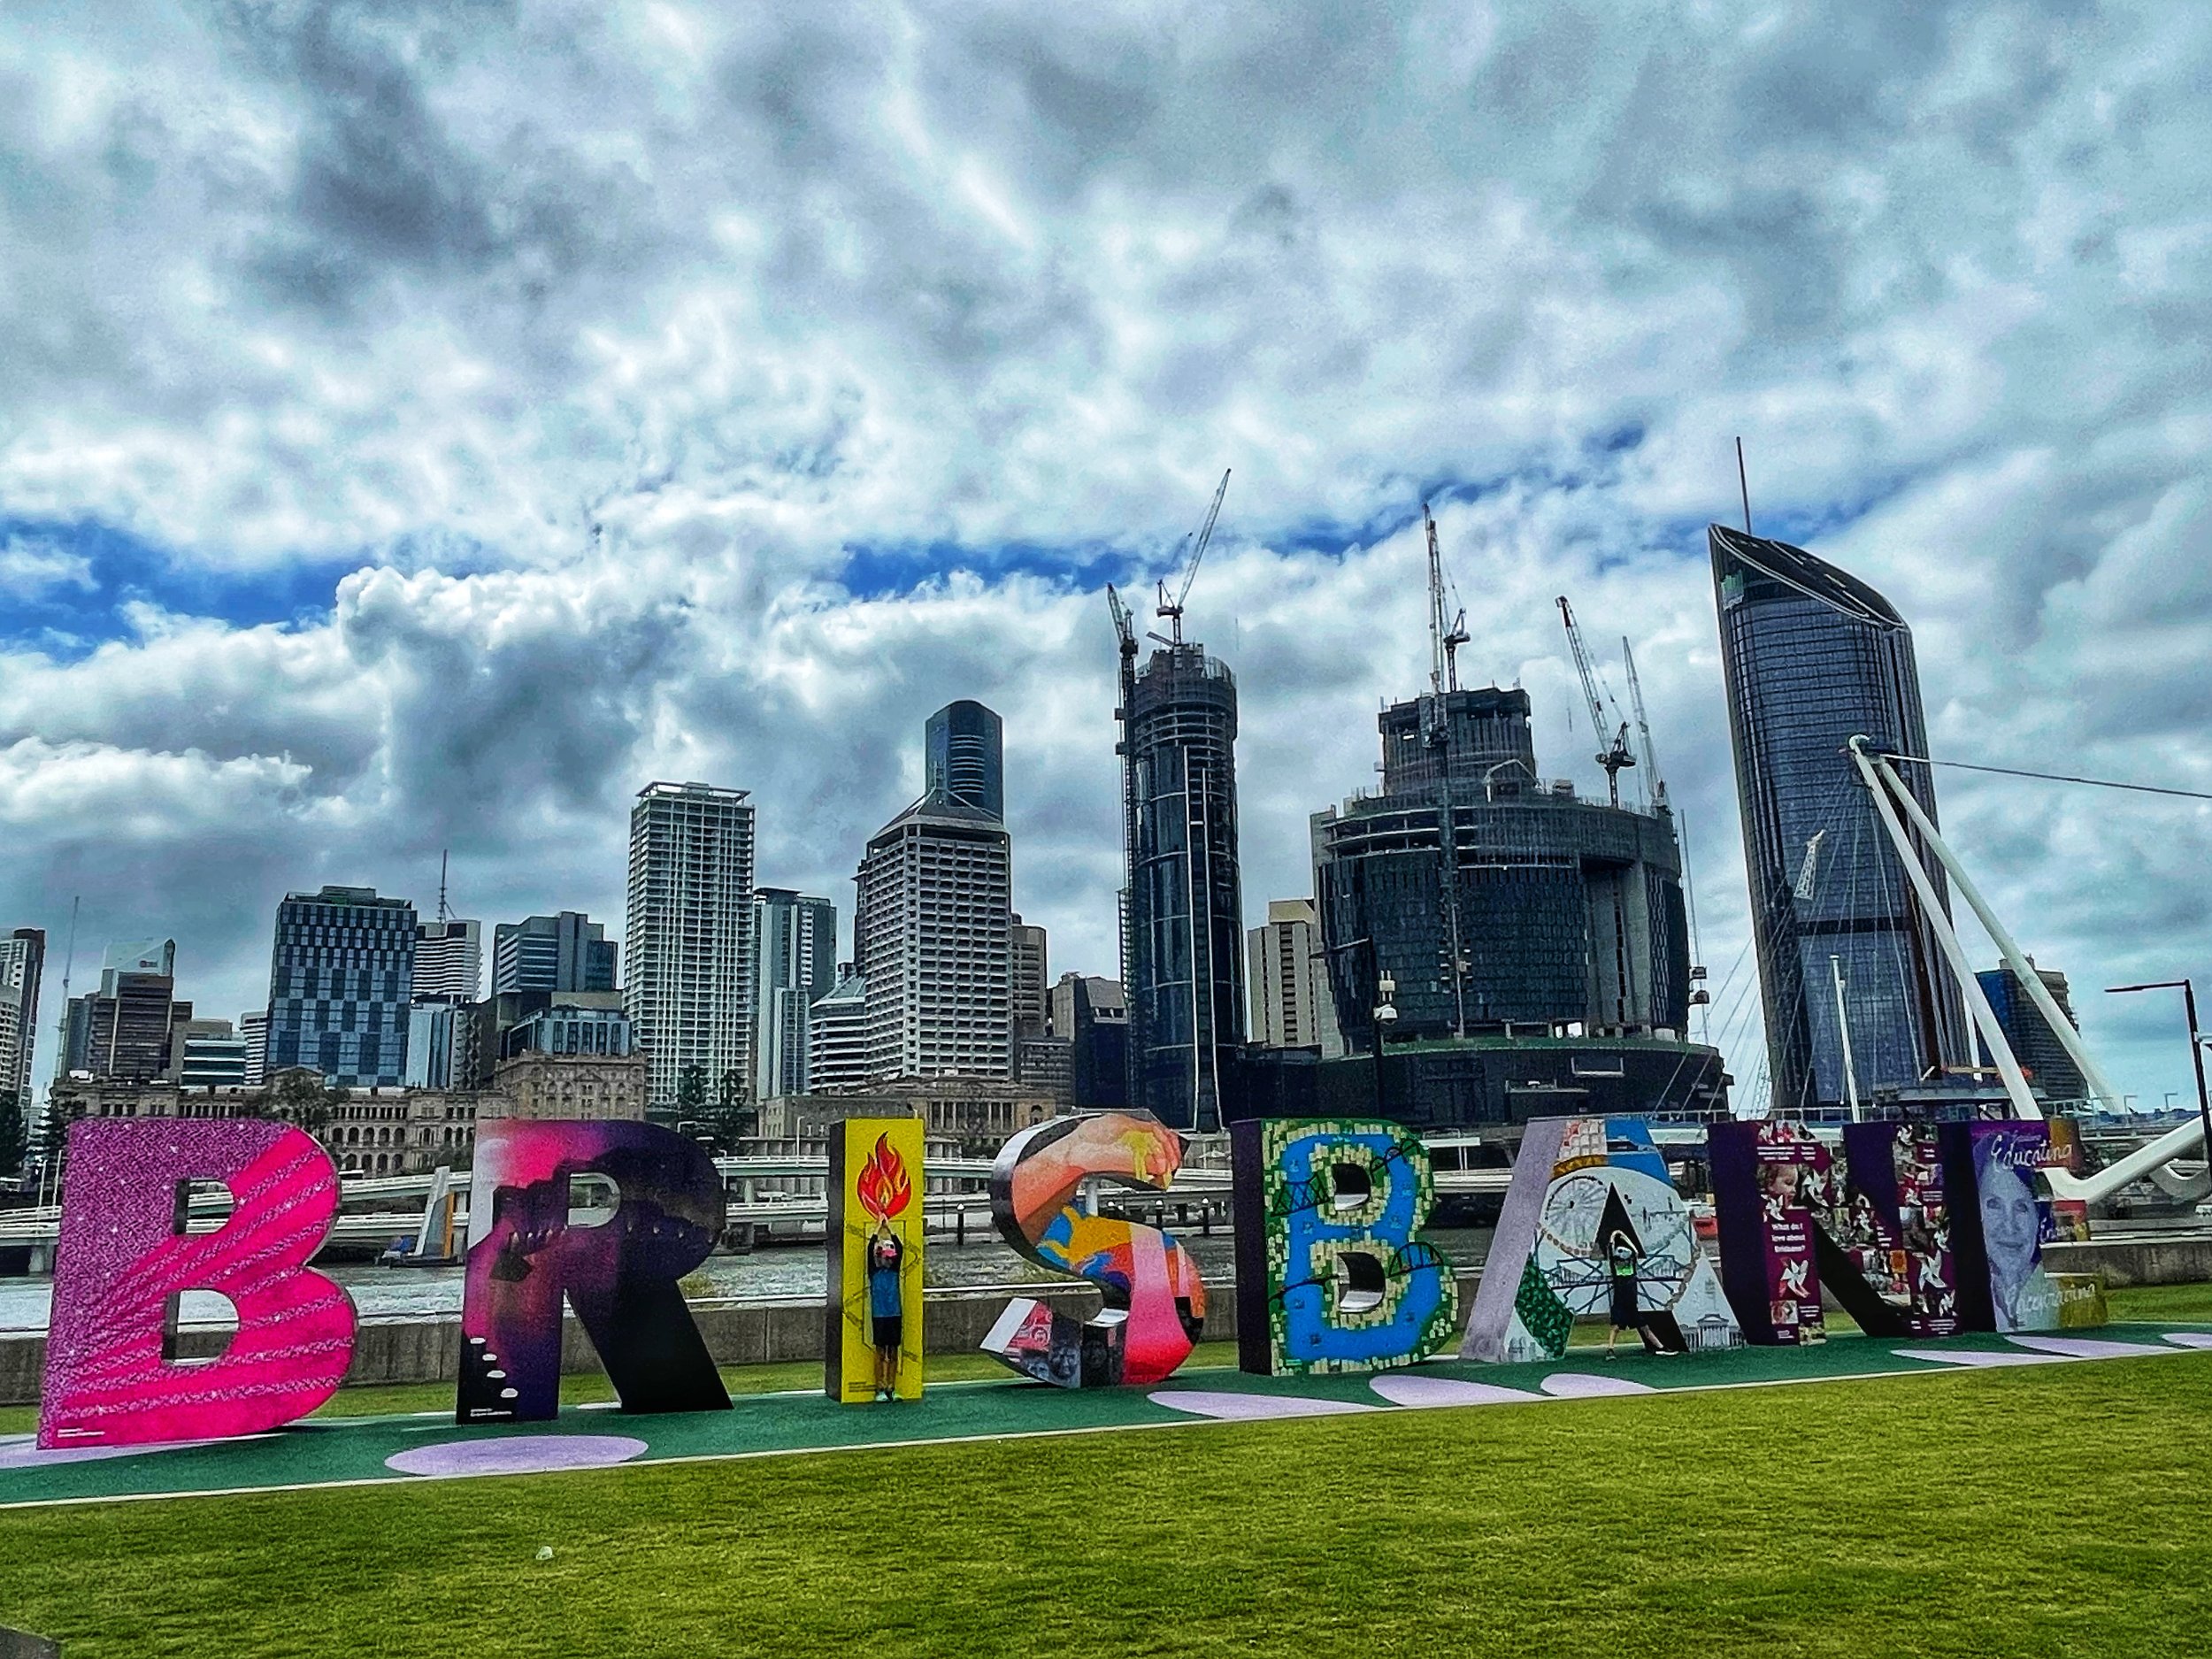 Brisbane's South Bank: What to See & Do